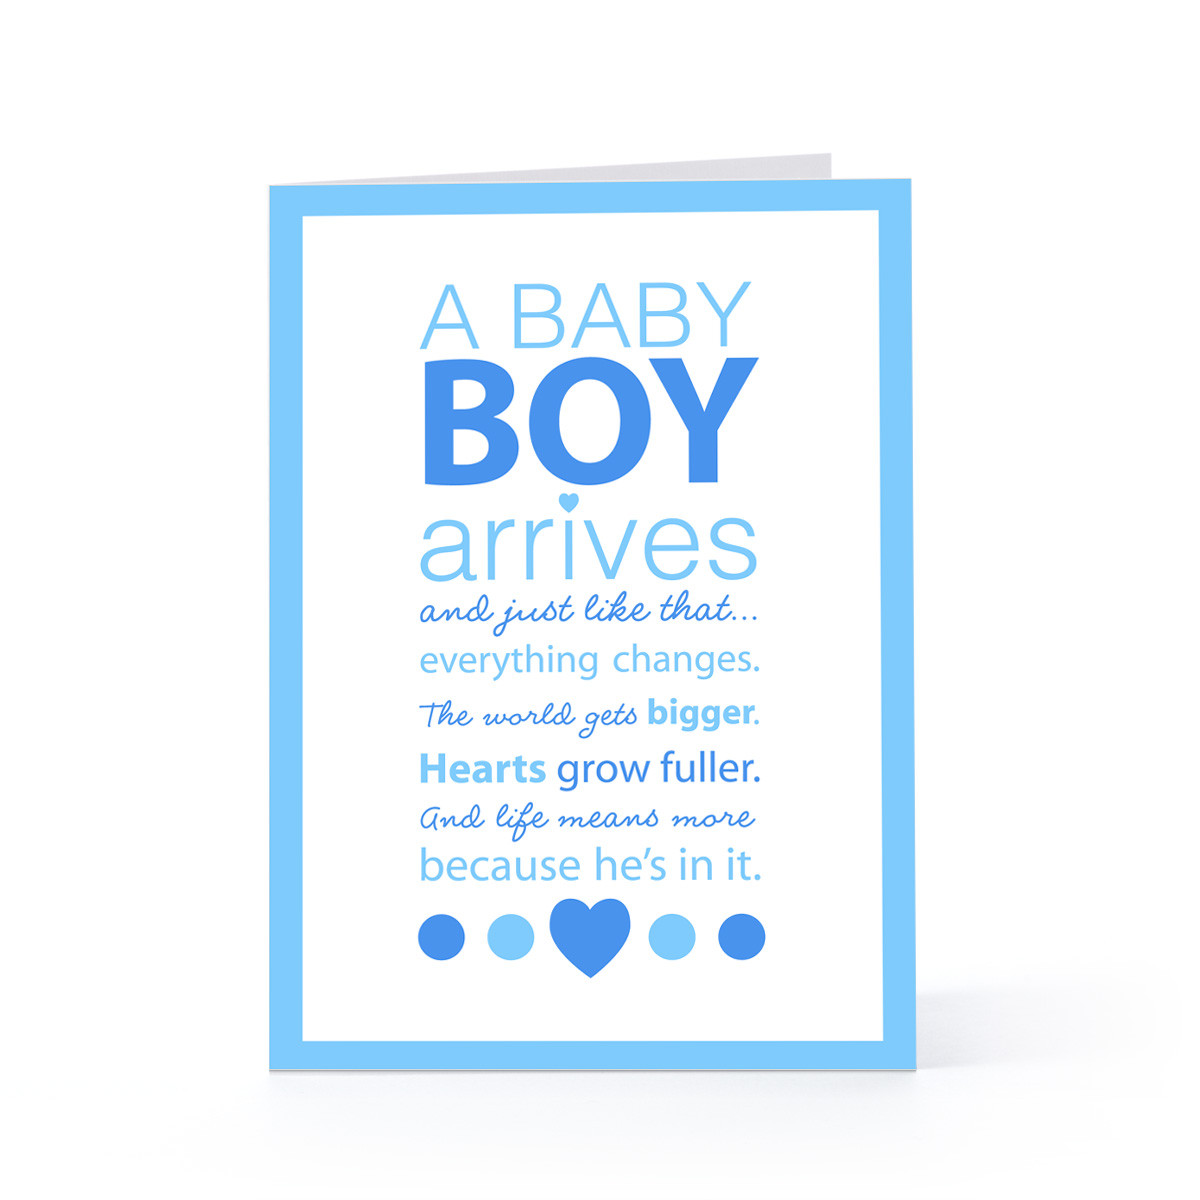 Quotes For Newly Born Baby Boy
 Wel e Quotes For Baby Boy Newborn QuotesGram